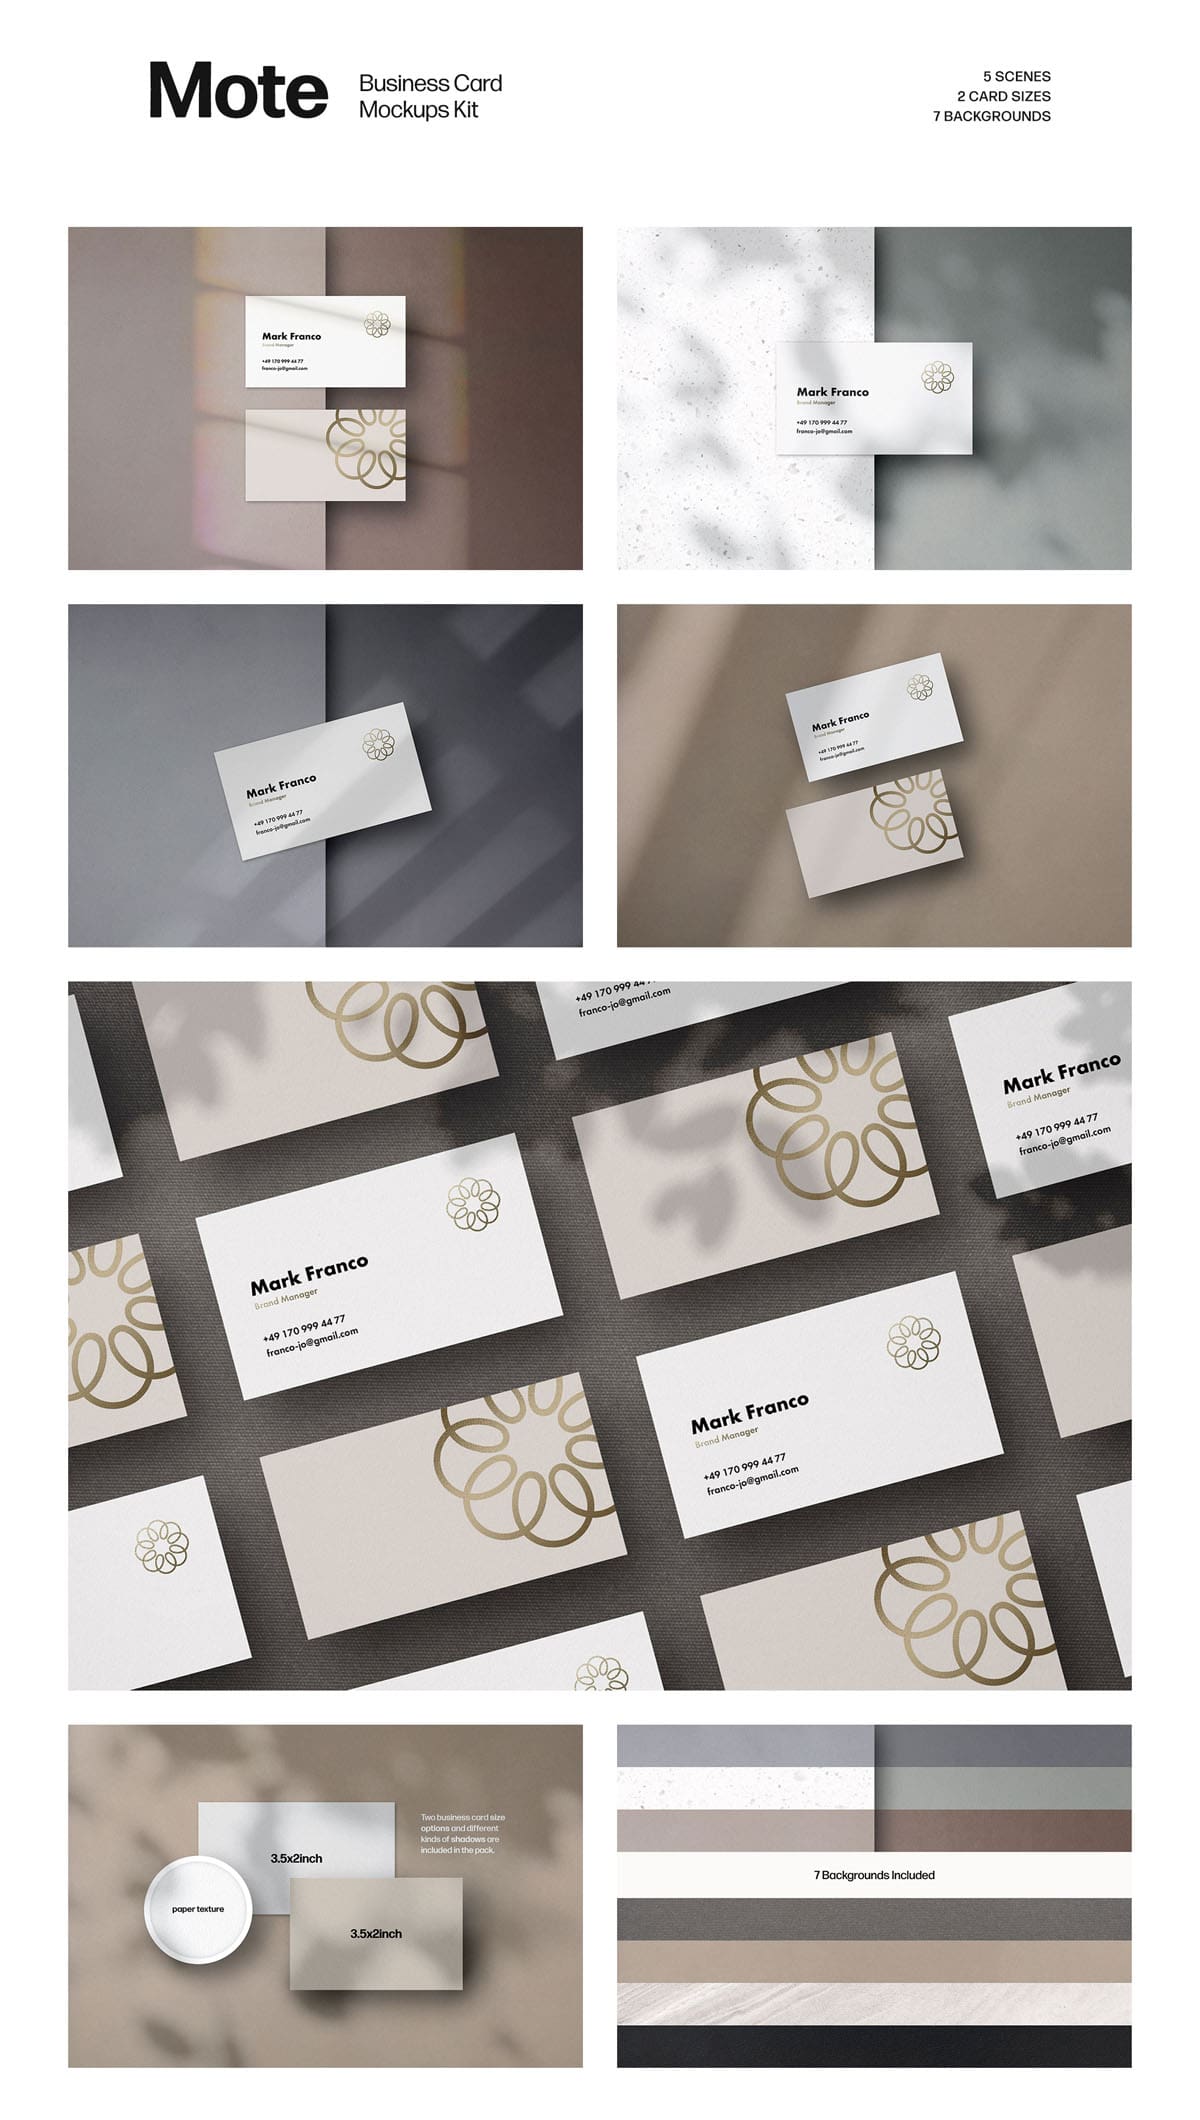 Mote Business Card Mockups Kit - Find the Perfect Creative Mockups